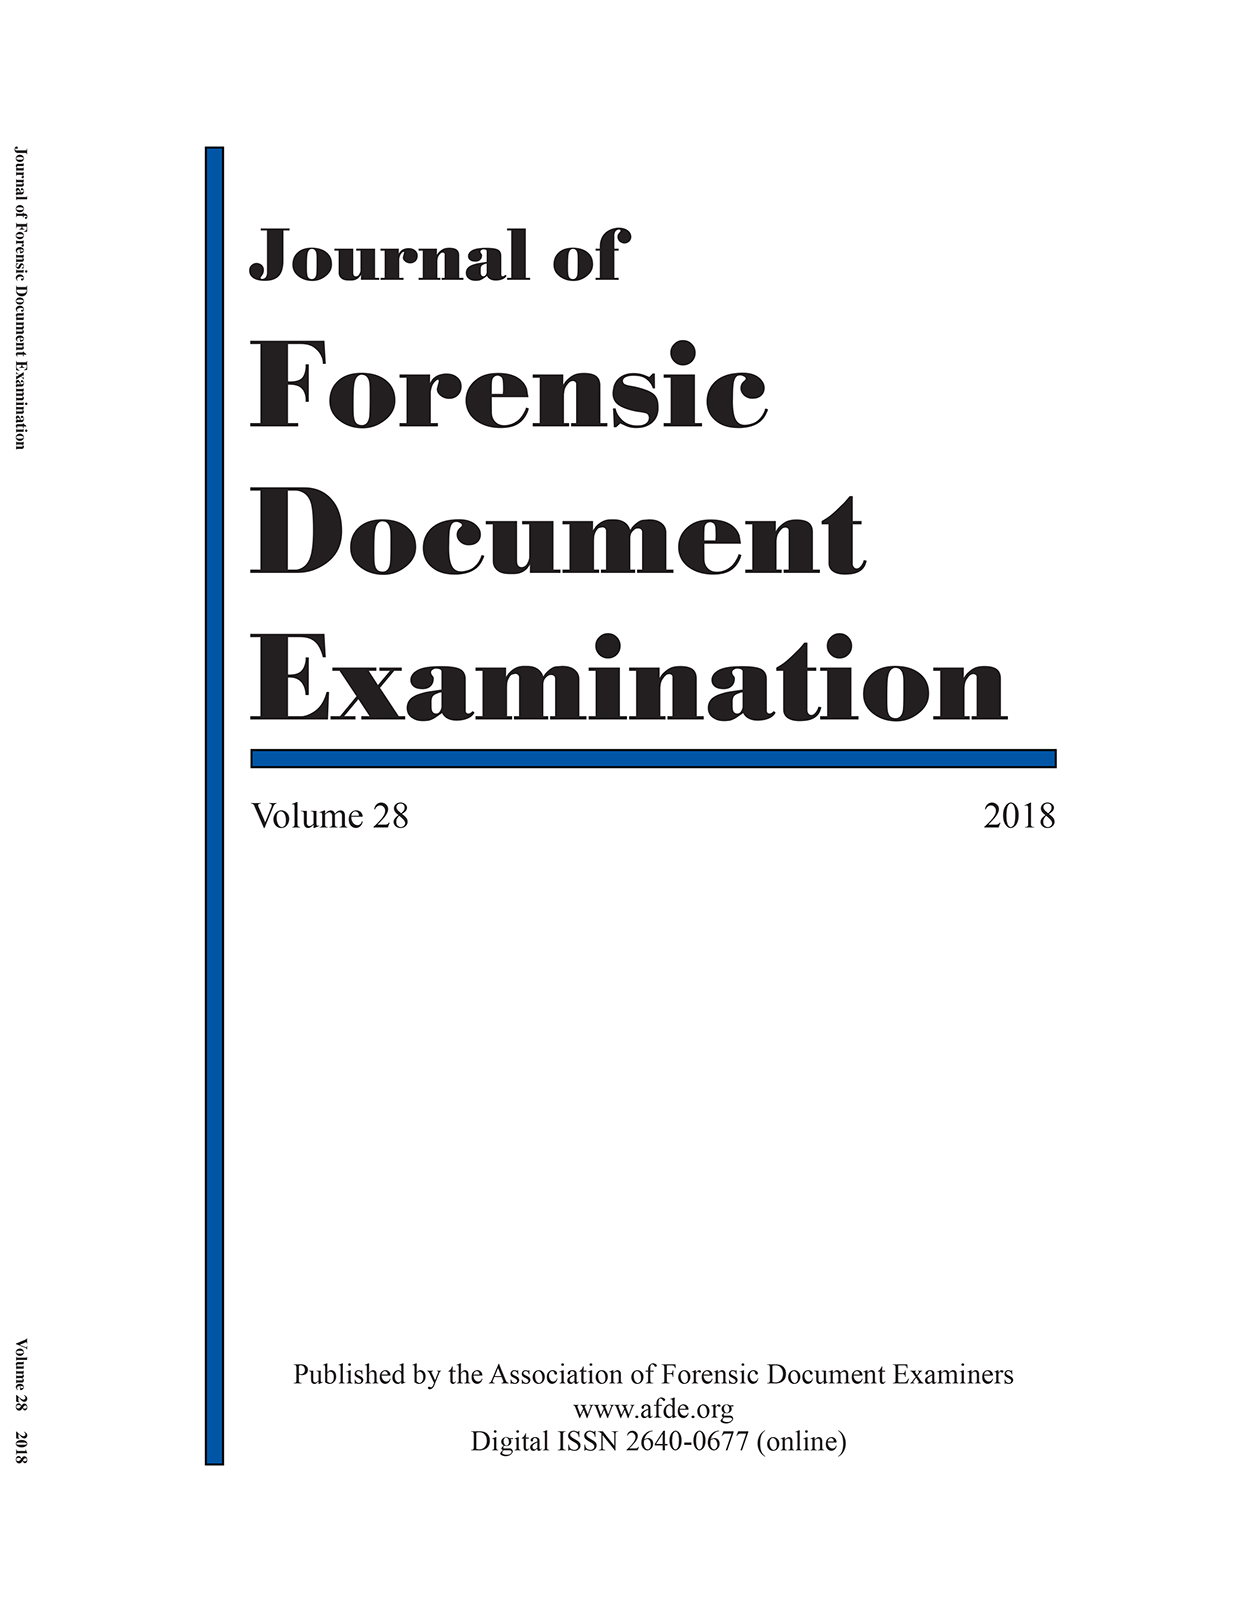 					View Vol. 28 (2018): 2018 Journal of Forensic Document Examination
				